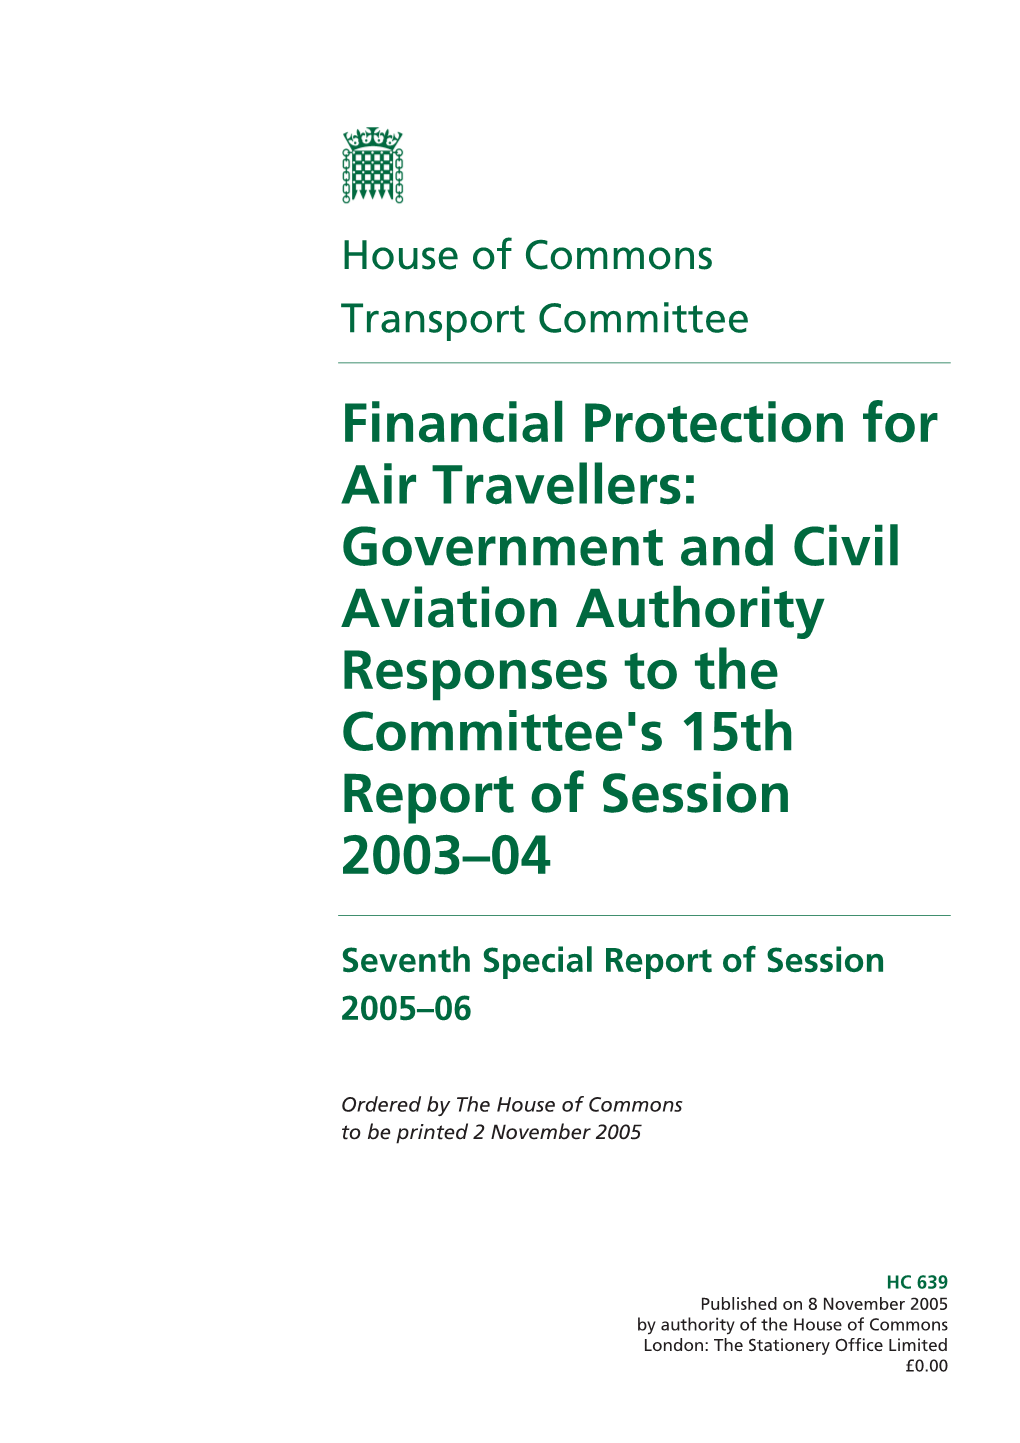 Financial Protection for Air Travellers: Government and Civil Aviation Authority Responses to the Committee's 15Th Report of Session 2003–04